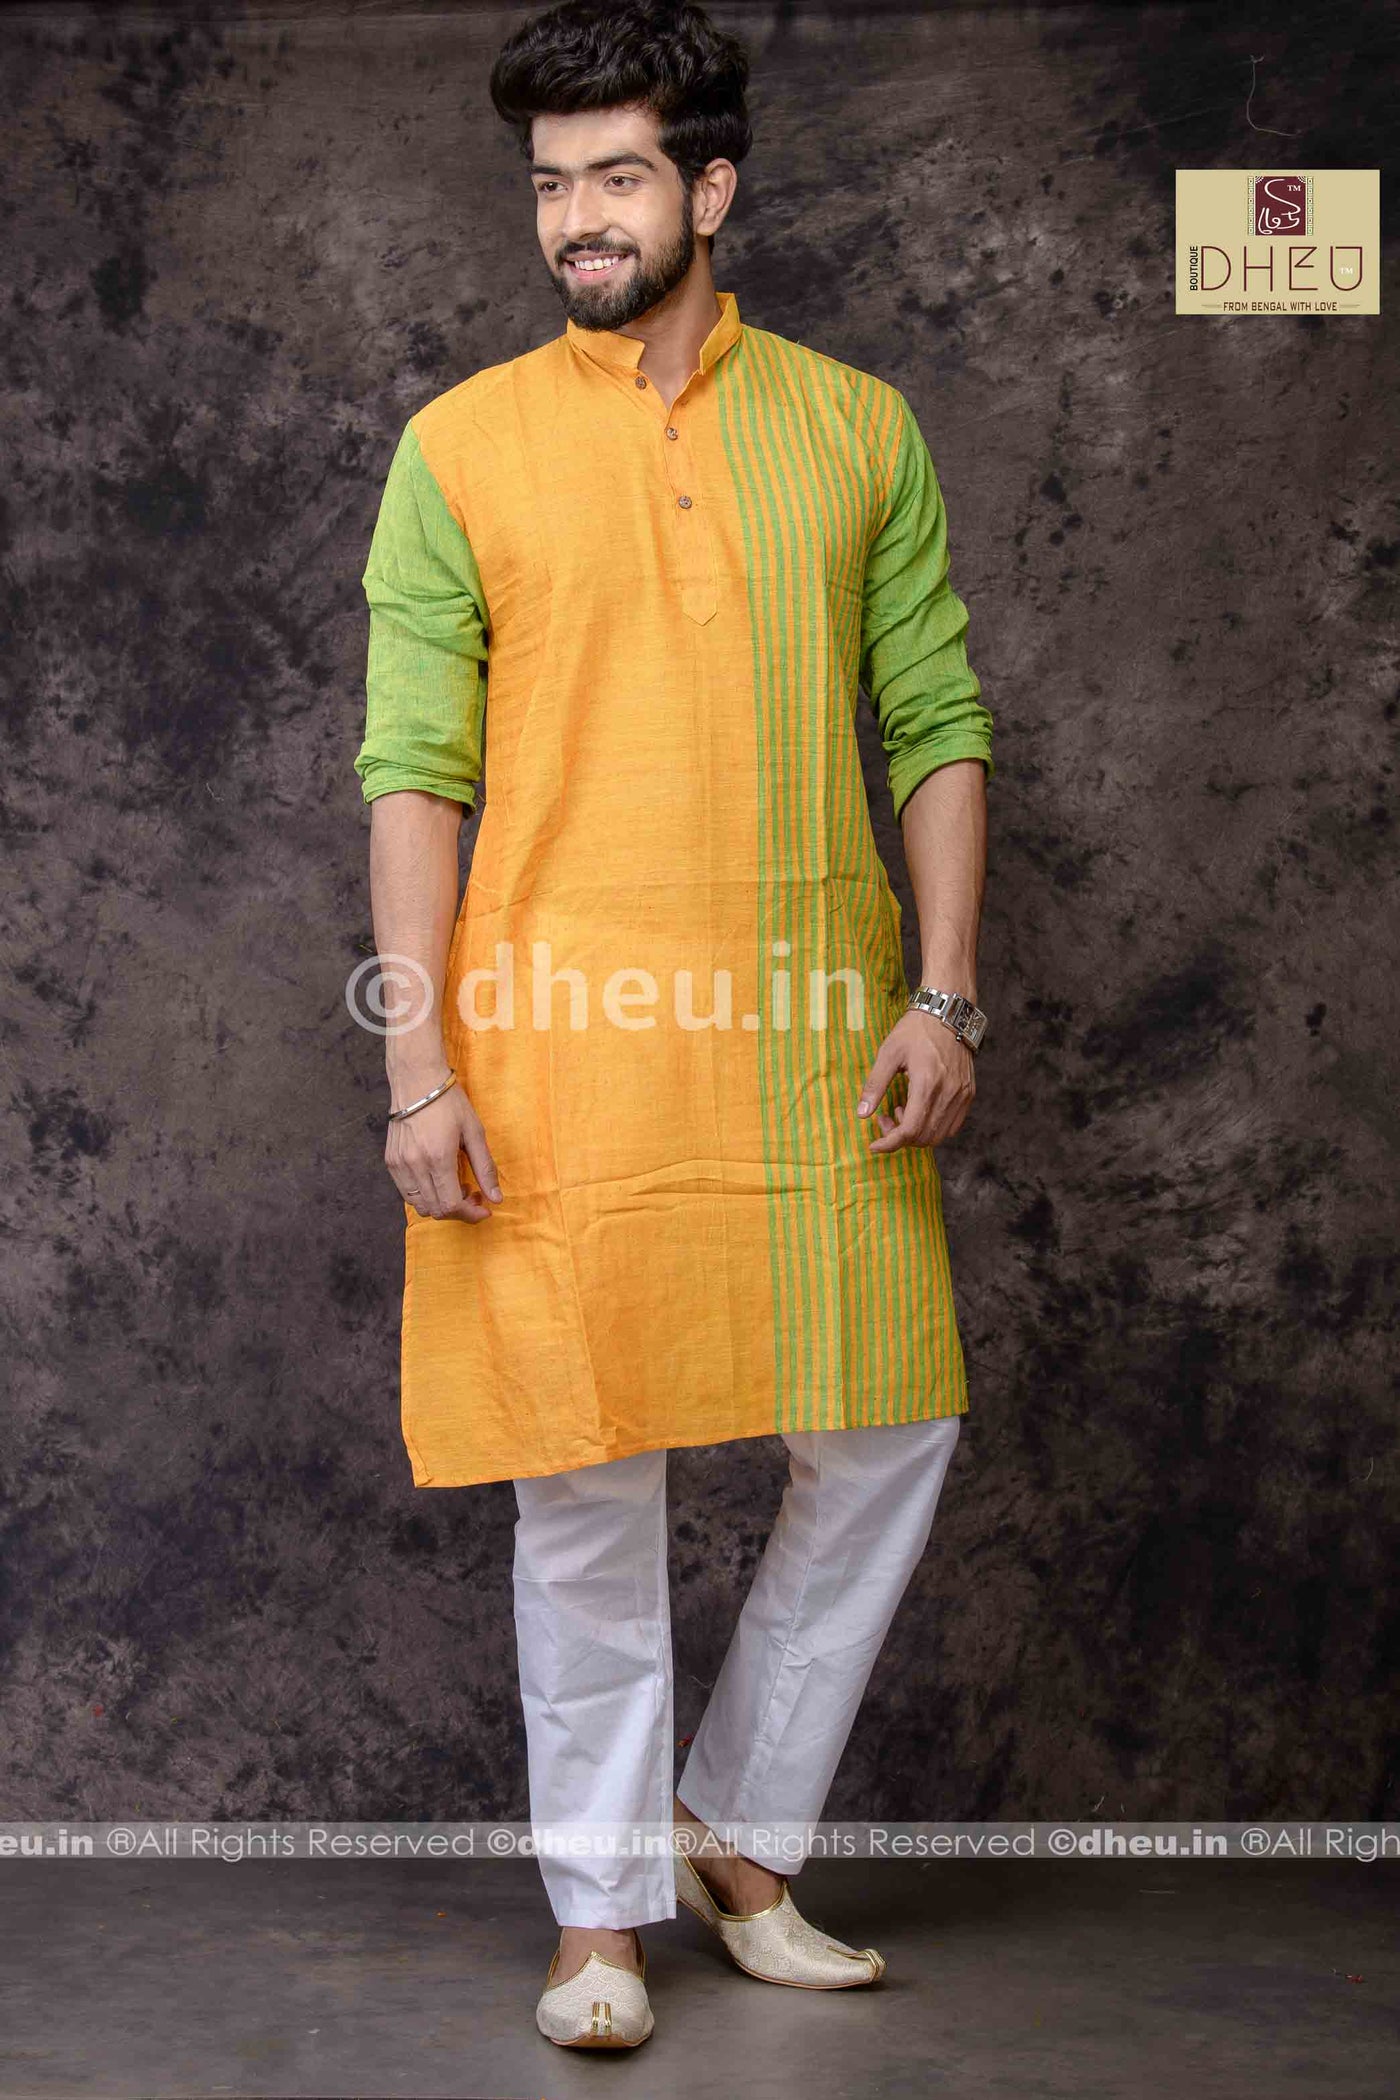 Vibrant green-yellow designer kurta at low cost in dheu.in